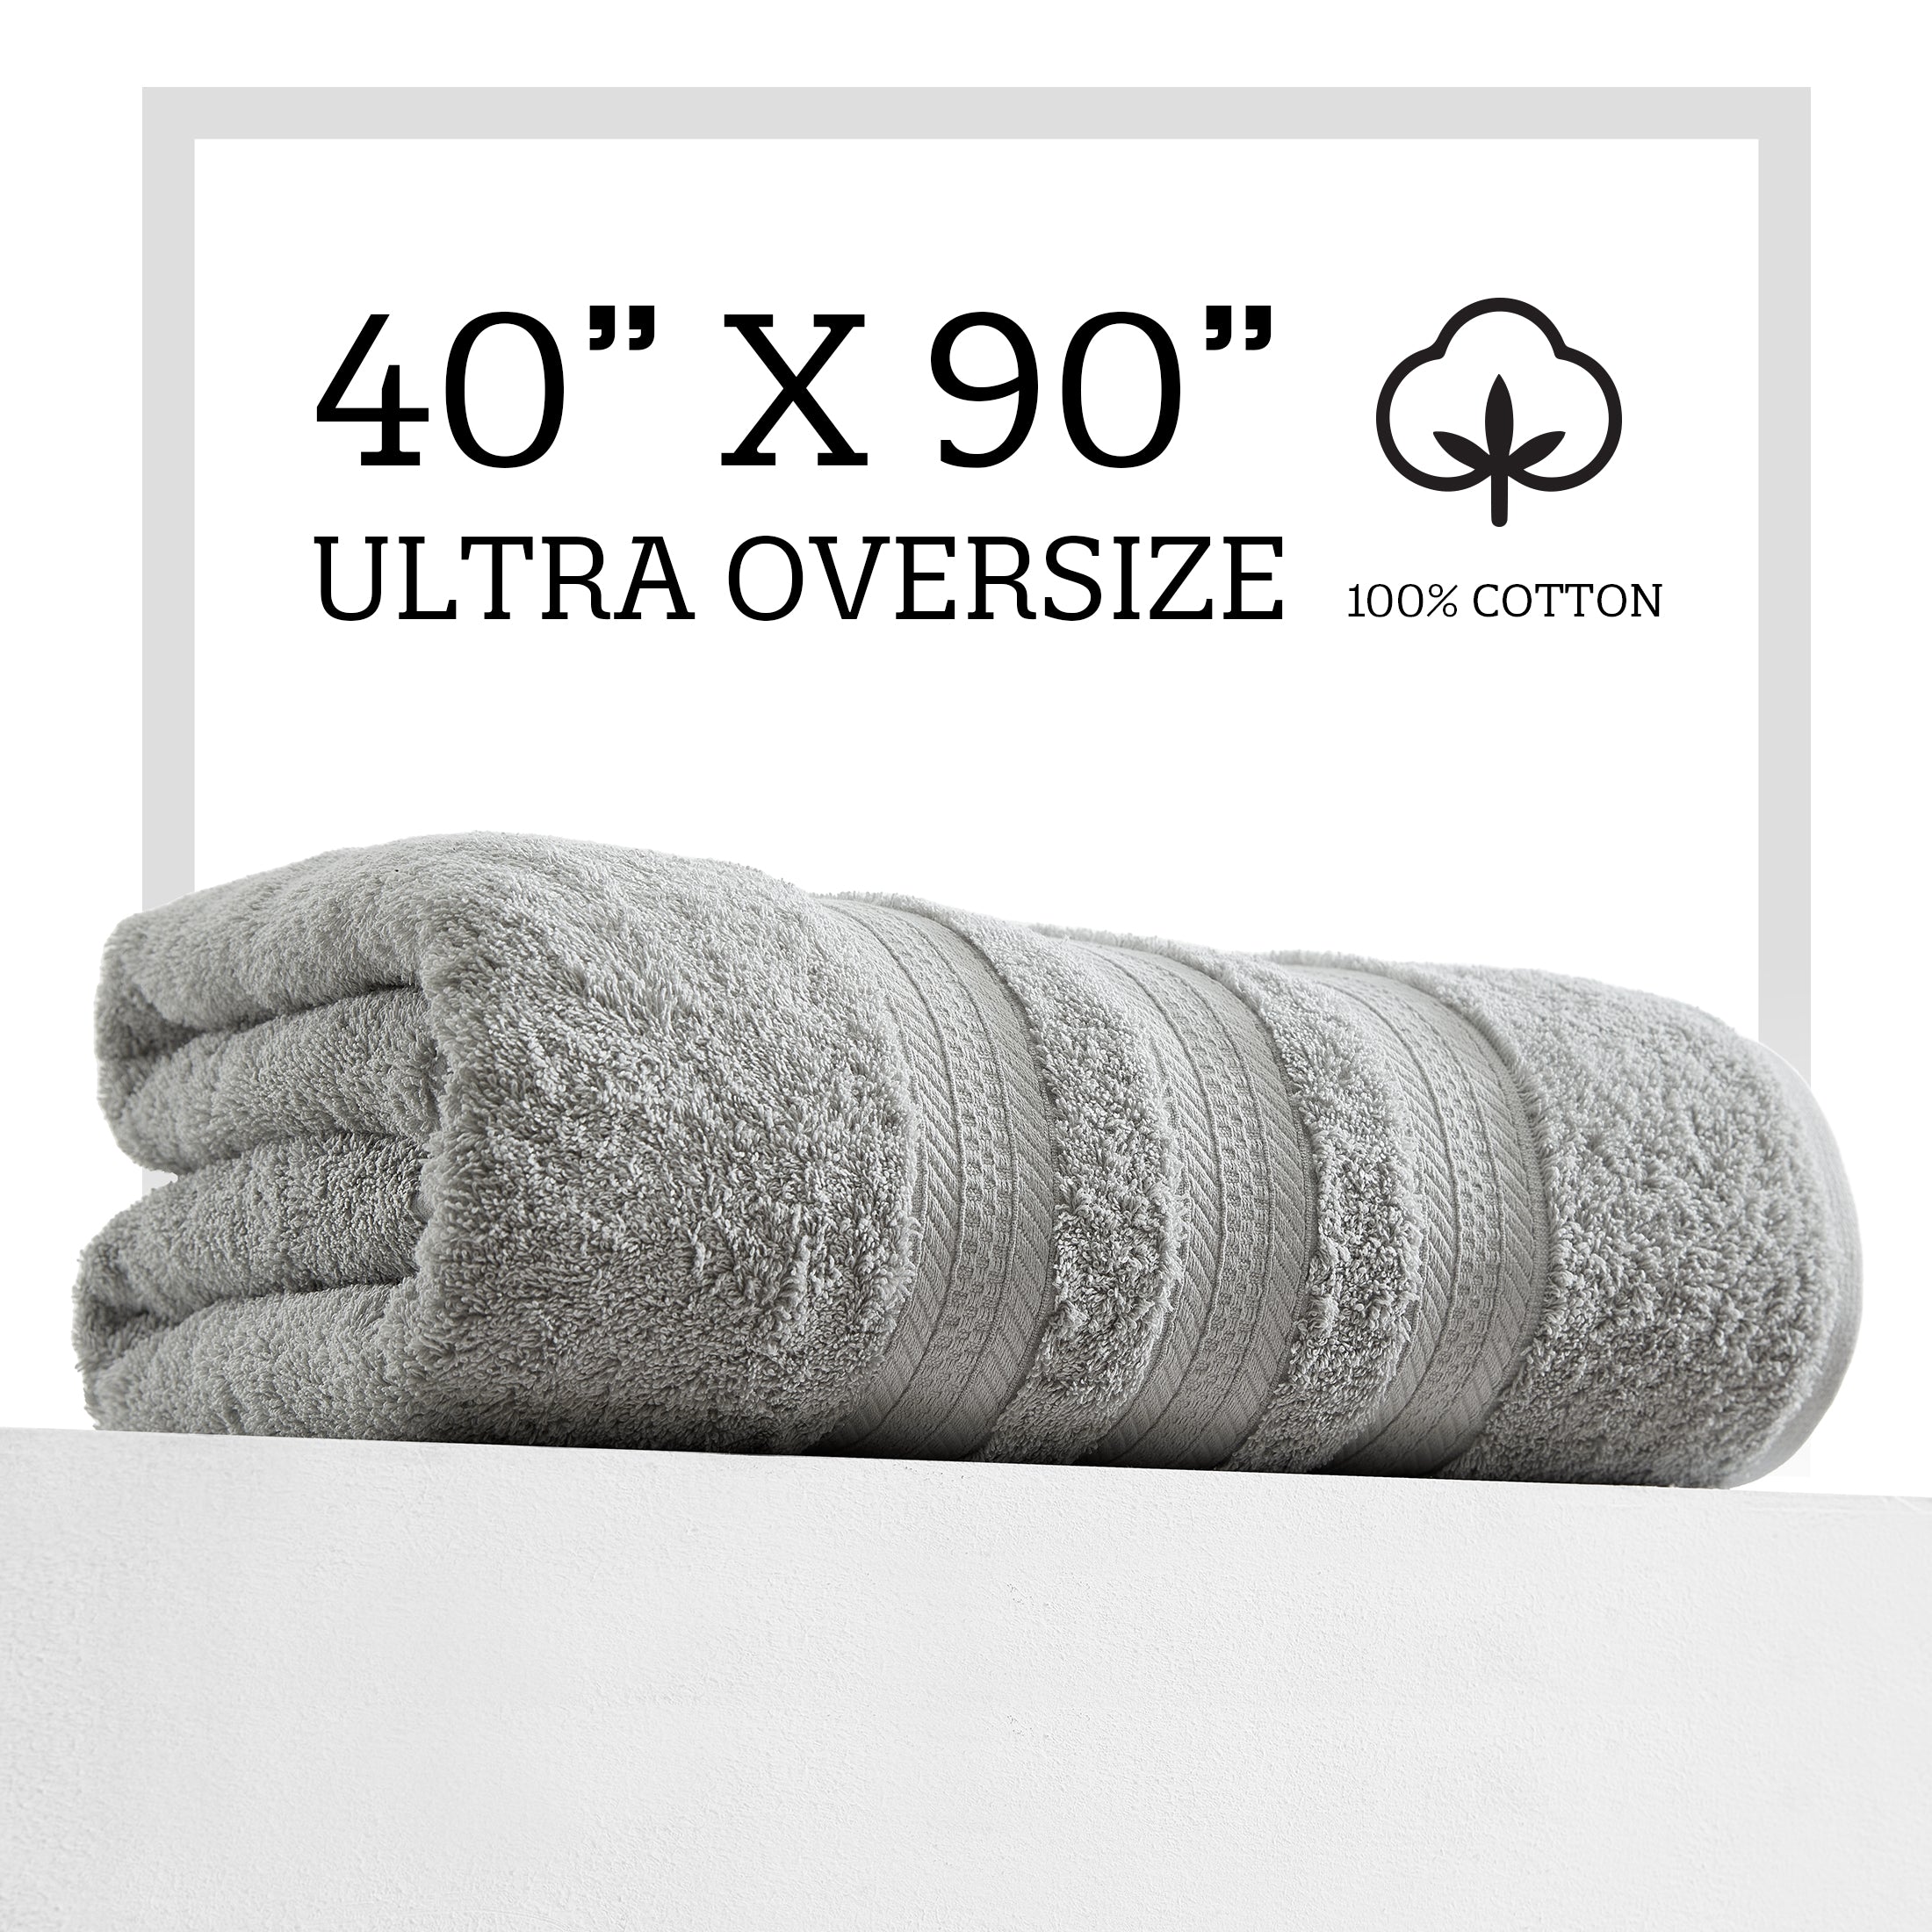 Luxury Bath Sheets, Extra-large Size, Softest 100% Cotton By